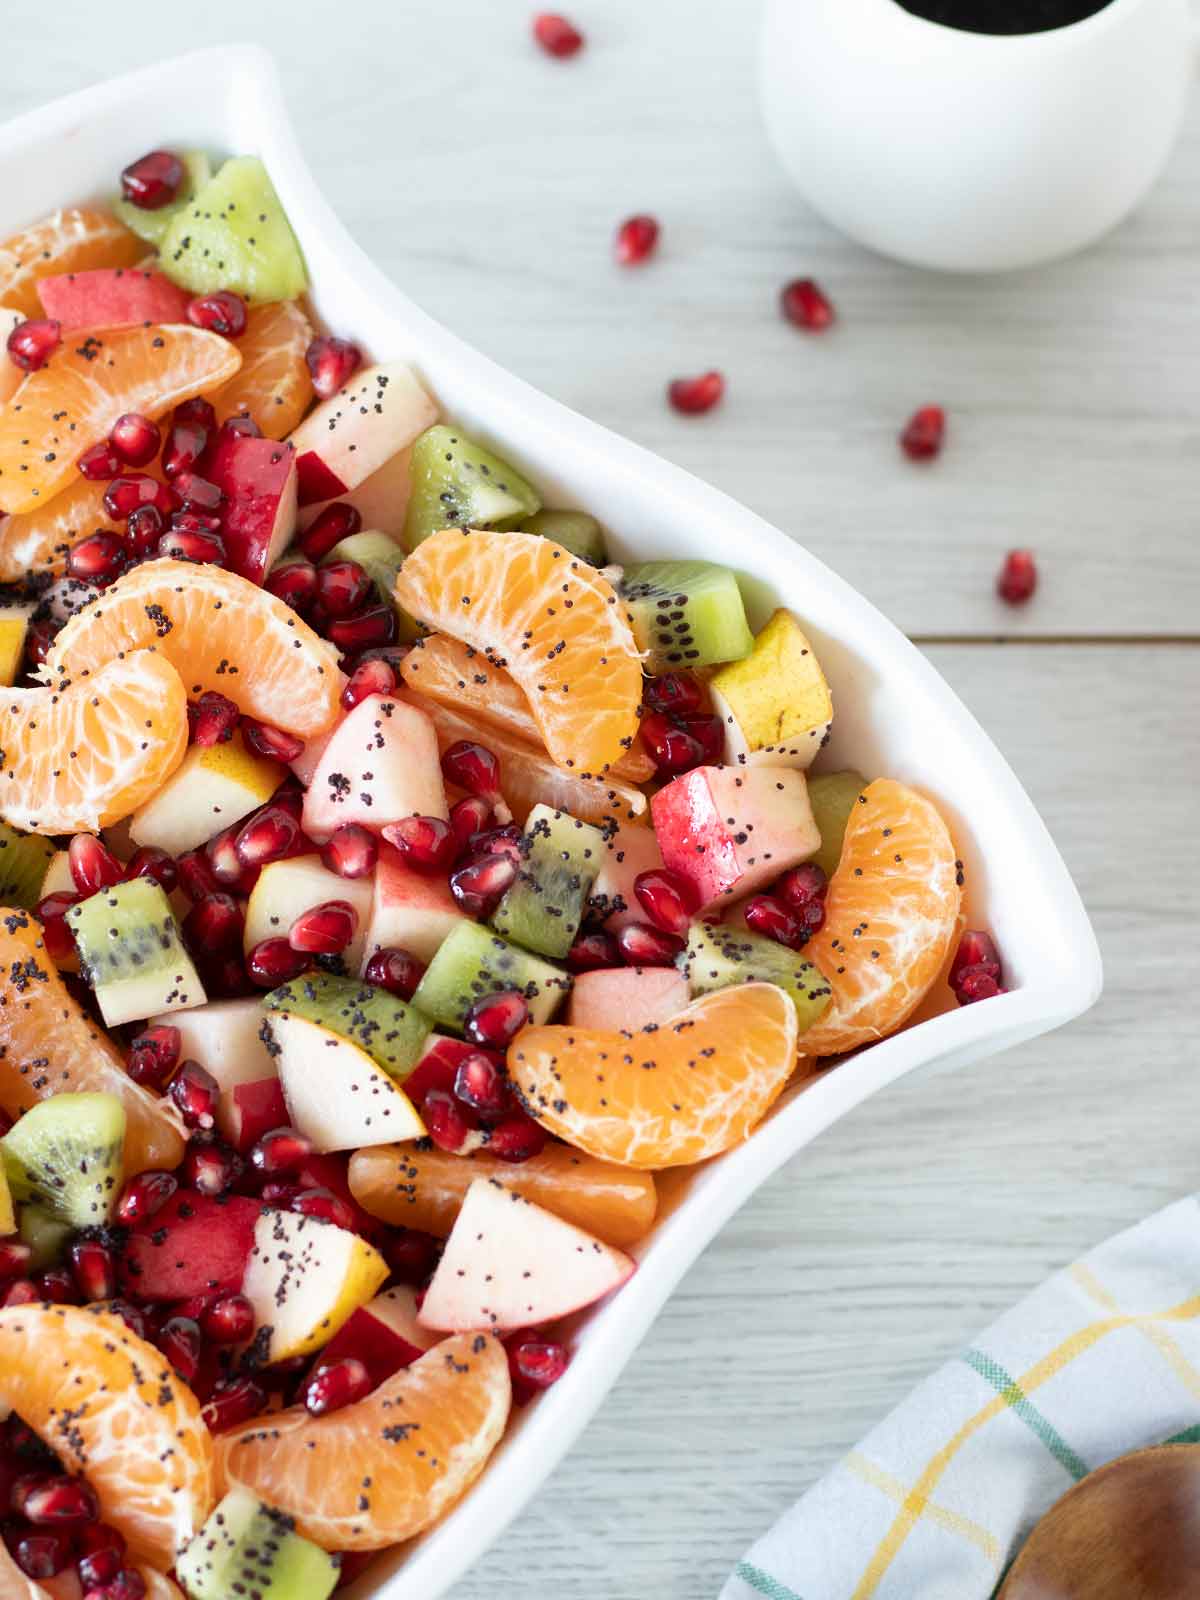 Healthy colorful winter fruit salad in a big bowl for Thanksgiving side dish or easy brunch